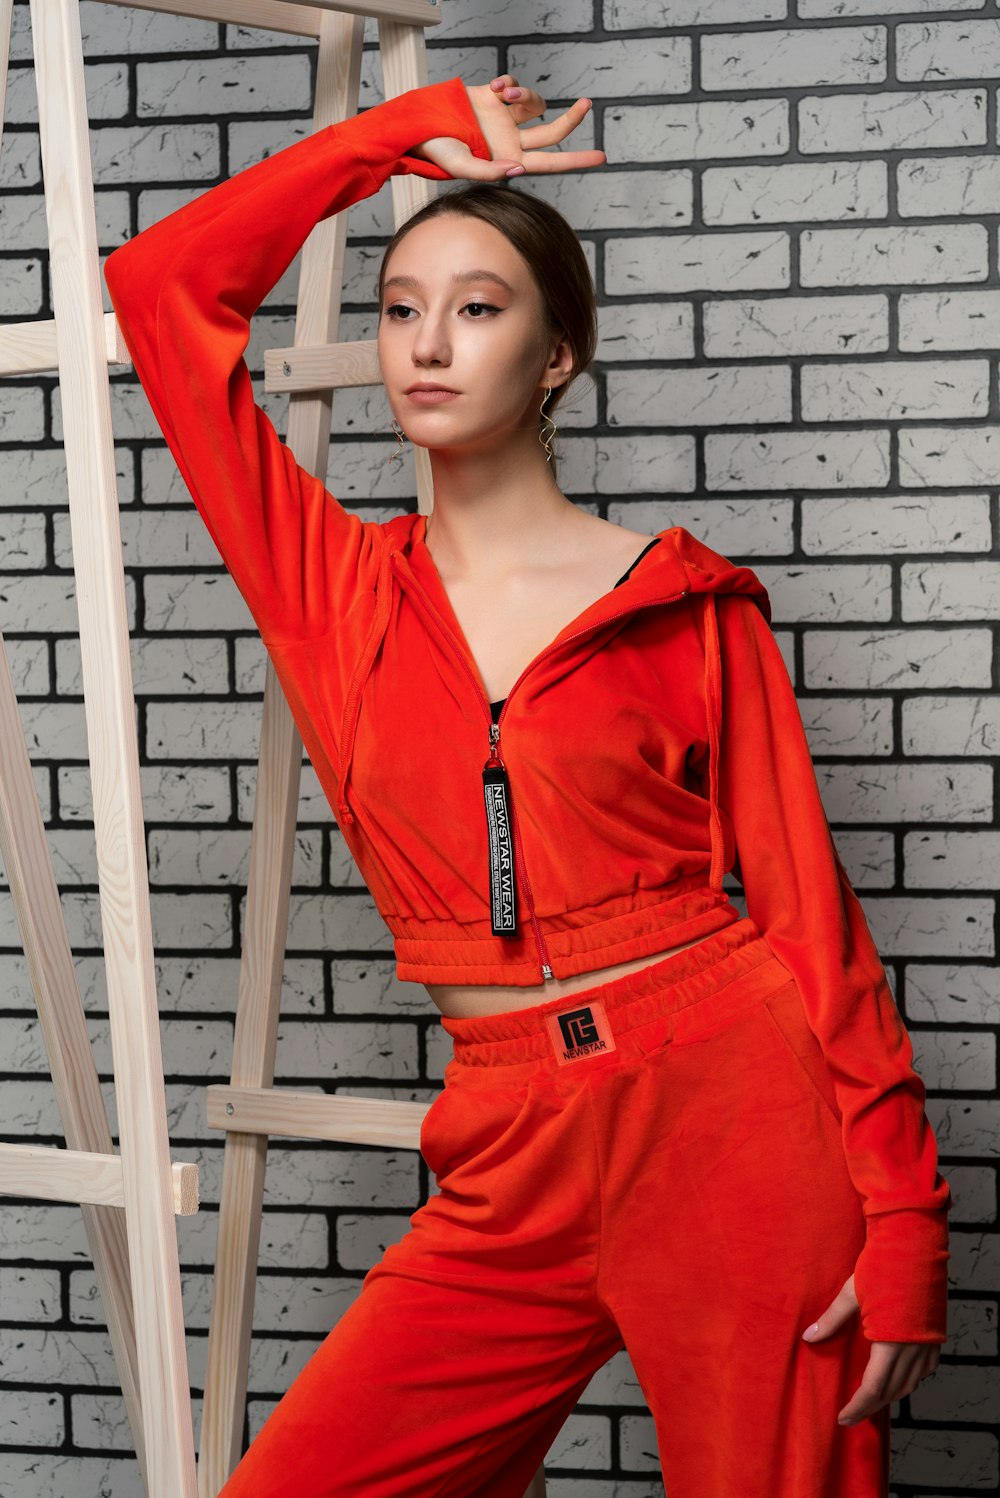 a woman in an orange outfit leaning against a ladder